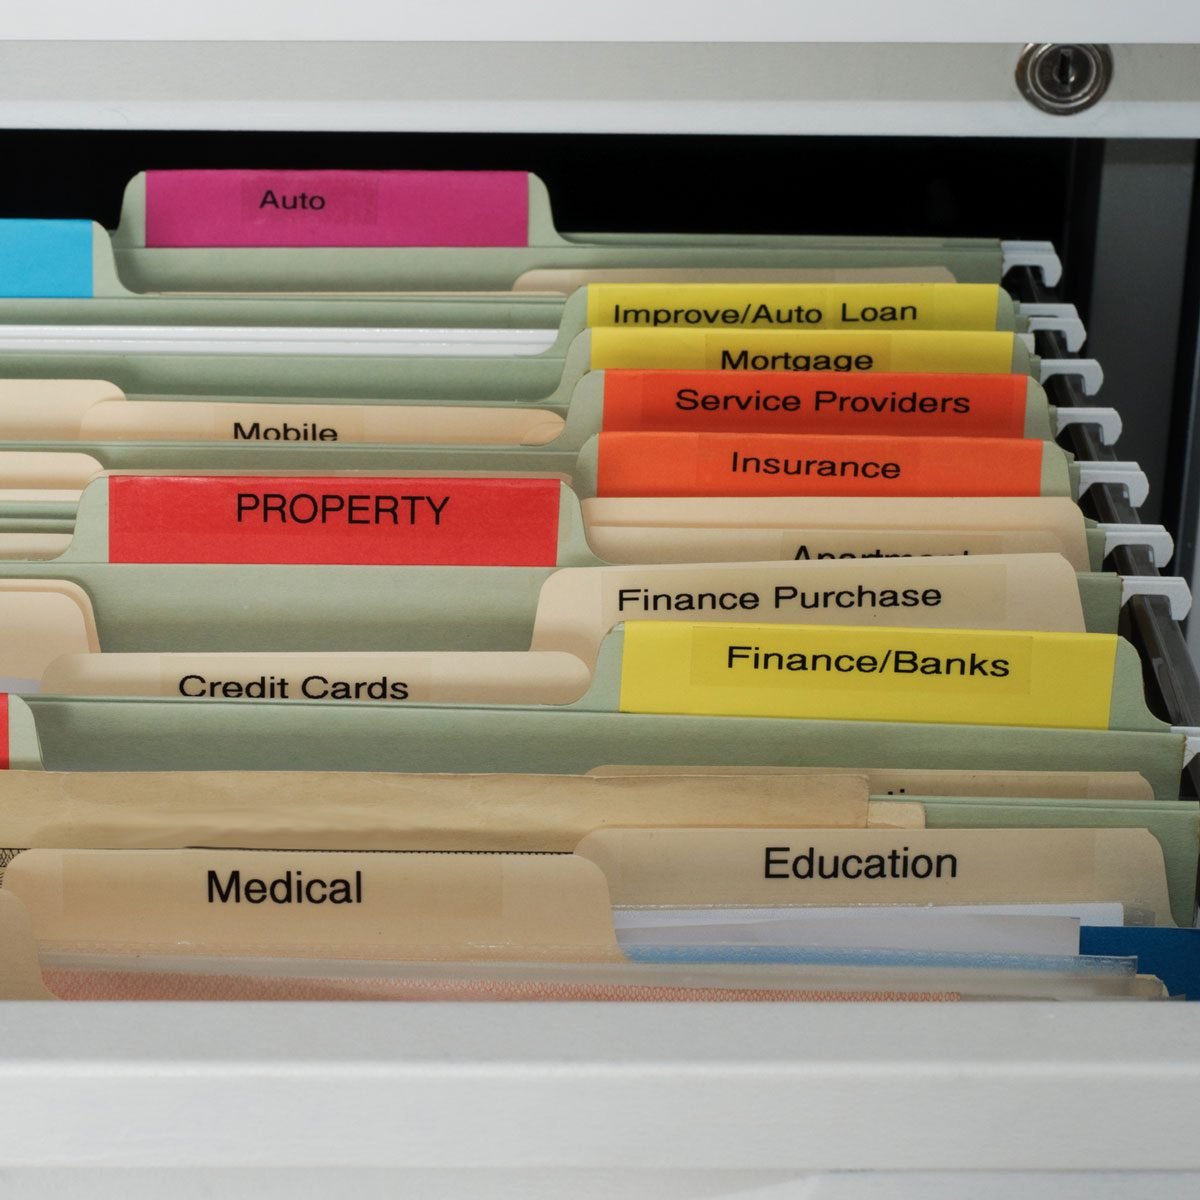 Best System for Organizing and Storing School Papers